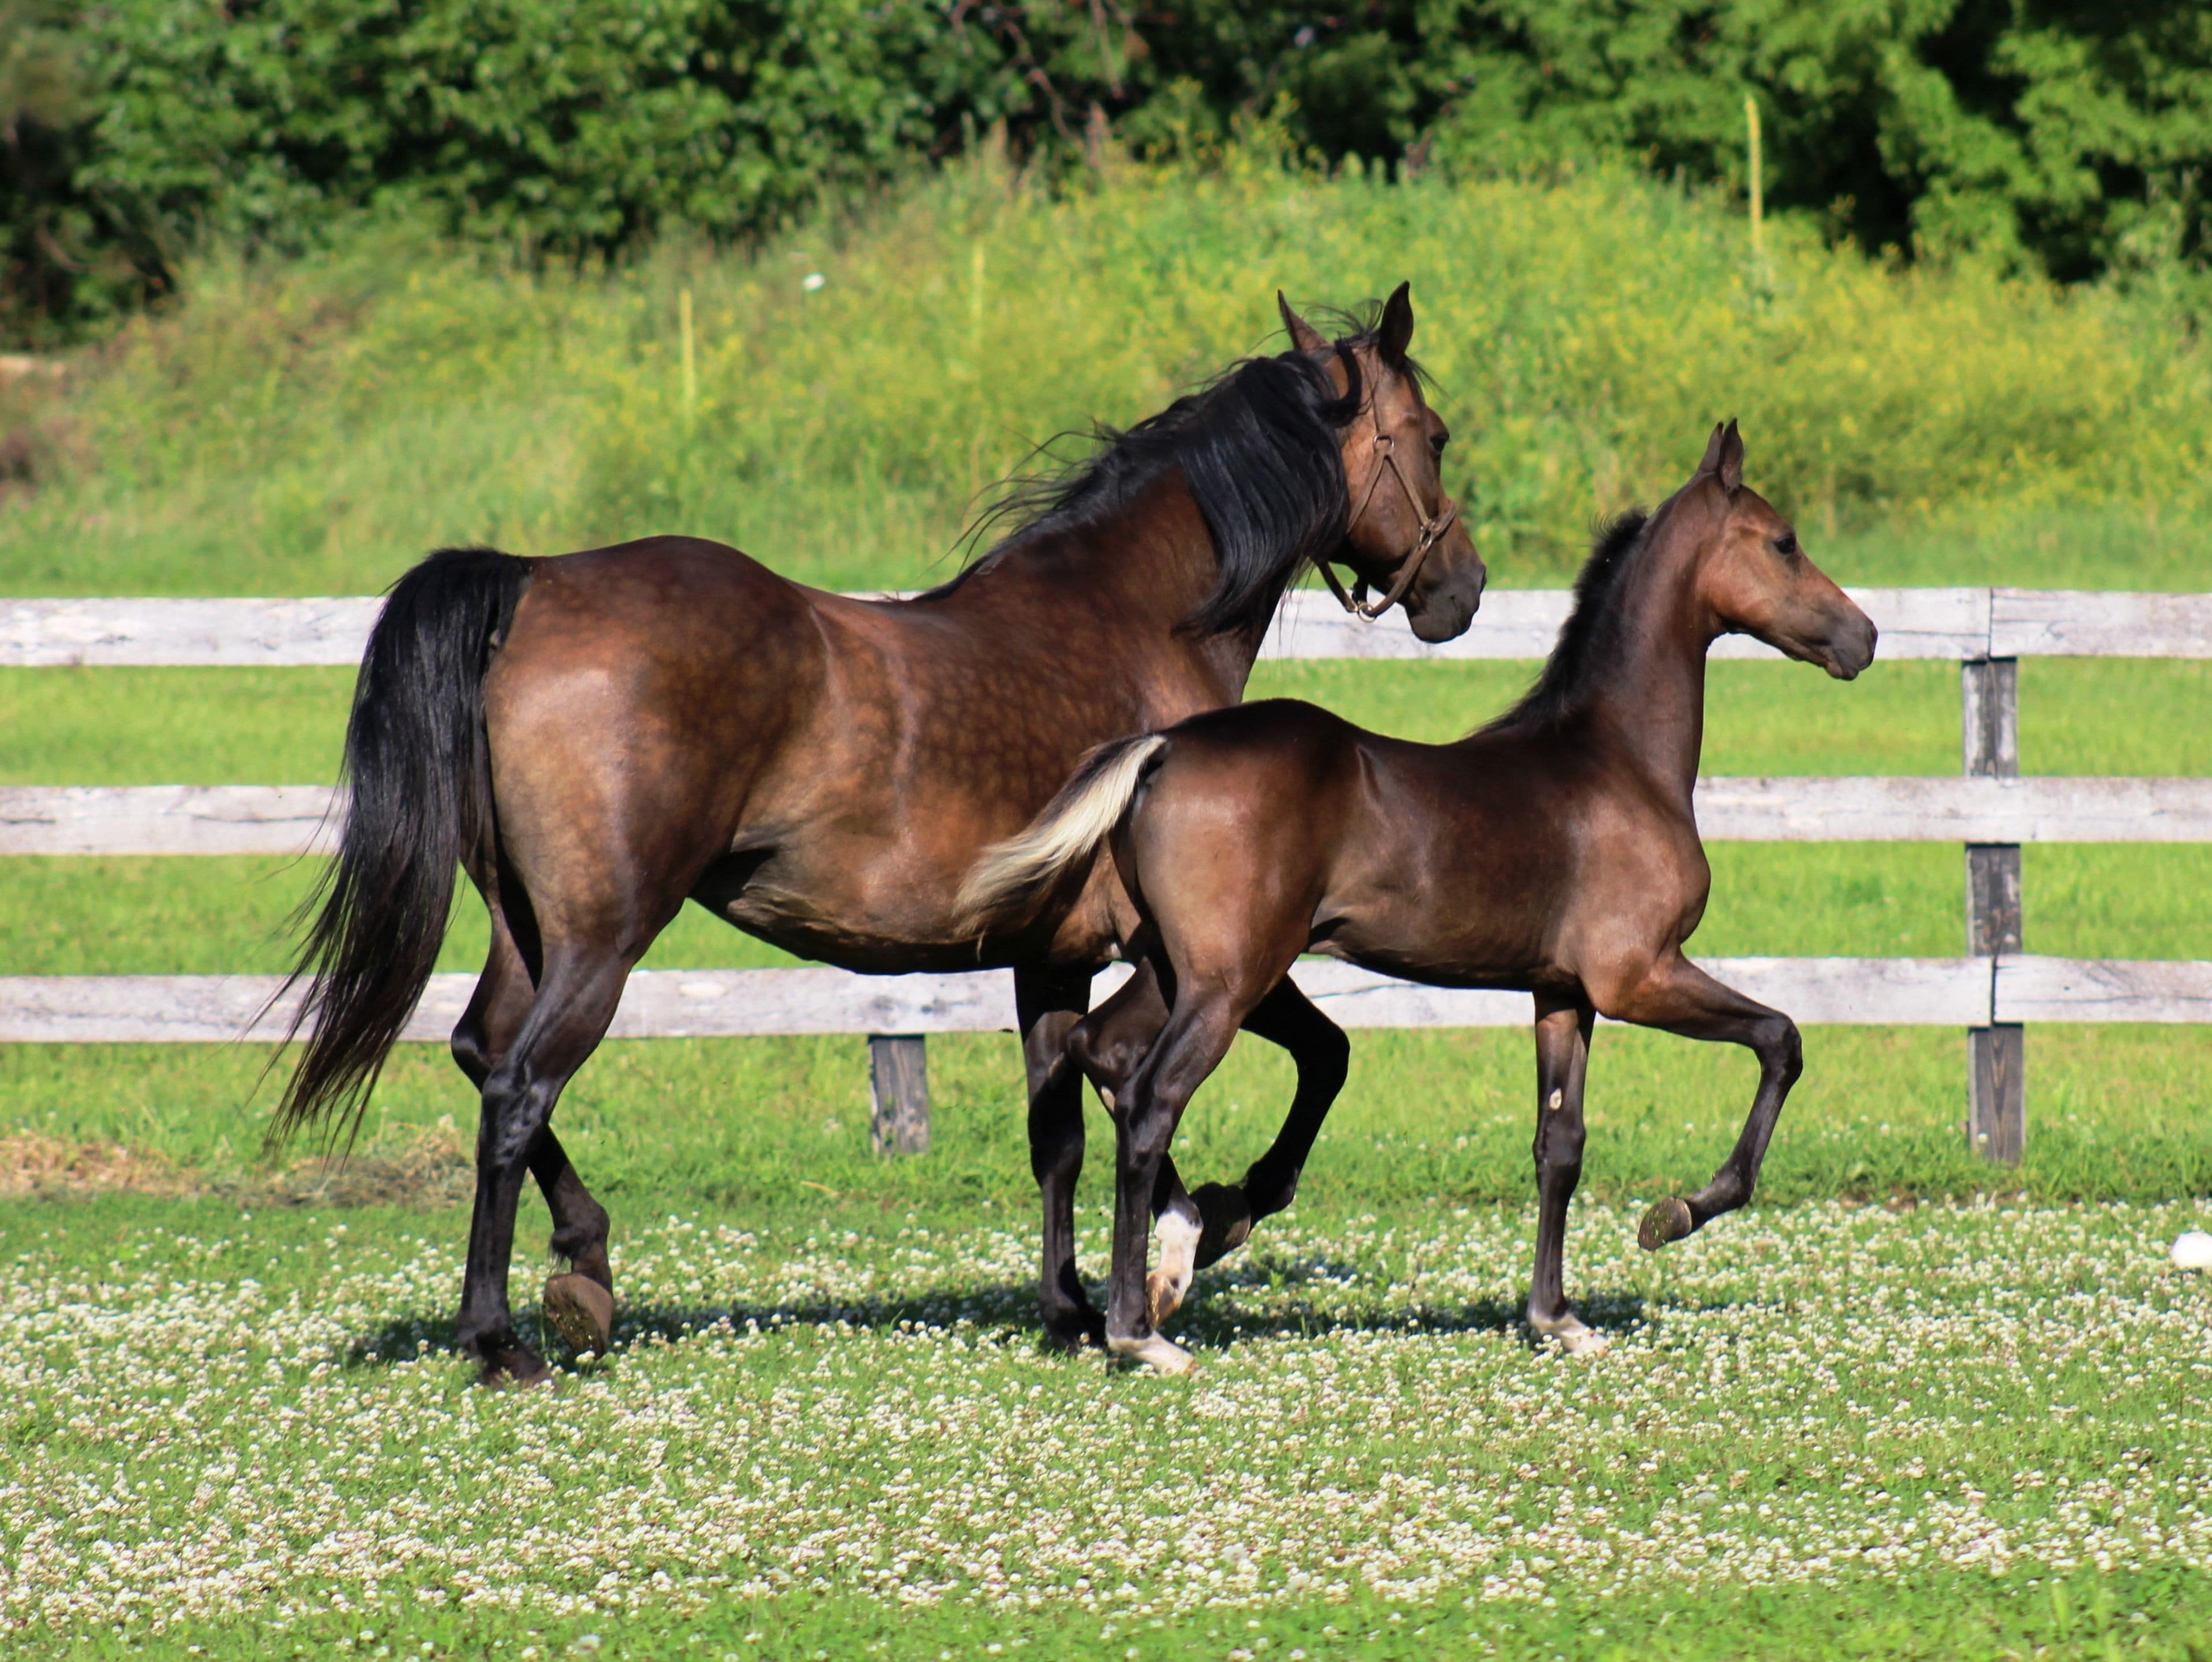 Adult And Young Horse On The Field